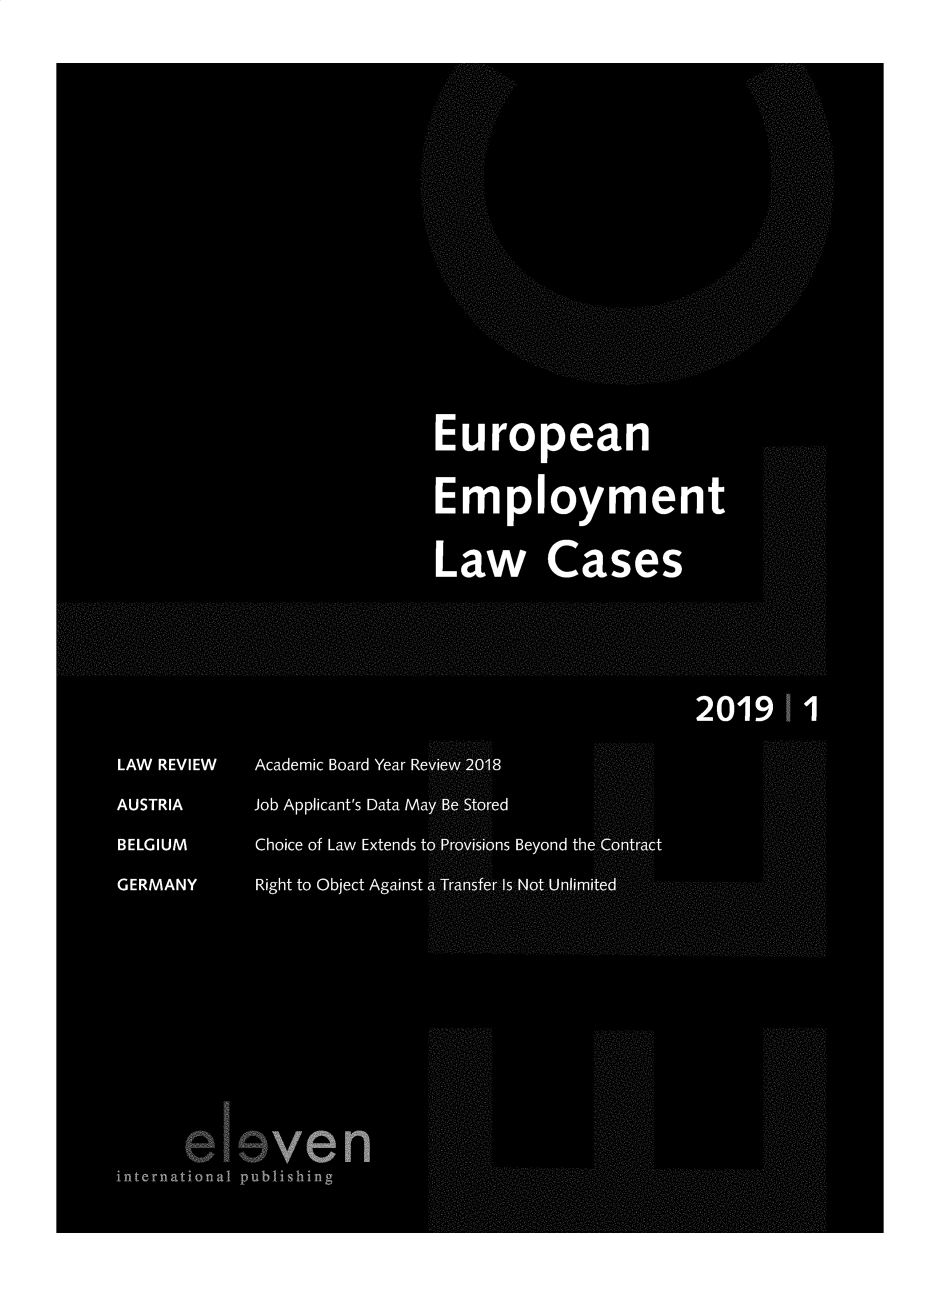 handle is hein.journals/eelc2019 and id is 1 raw text is: 












                                    .. .. . . . . . . ..







                              European


                              Employmen
                                                            . . . ........


                              Law Cases




. . . . . . . . . . . . . . . . . . ........... . . . . . . . . . . . . ......... . . . . . . . . . . . . . . . . . . ...... . . . . . . . . . . . . . . . . . . ........... . . . . . . . . . . . . ......... . . . . . . . . . .                                                                                                                                                                                                                                                                                    . . . . . . . . ...... ........... ......... ........ ..... . . . . . .

                                                    2 019    1

   LAW REVIEW  Academic Board Year ReVieW'2018

   AUSTRIA    Job Applicant's Data MayB-bflSt6fed

   BELGIUM     Choice of Law Extends tdP' vi[46ns Beyond the C'M eAtt

   GERMANY     Right to Object Against .,Not U.nlim













         eleven
   international publishing
                                                    ...........


